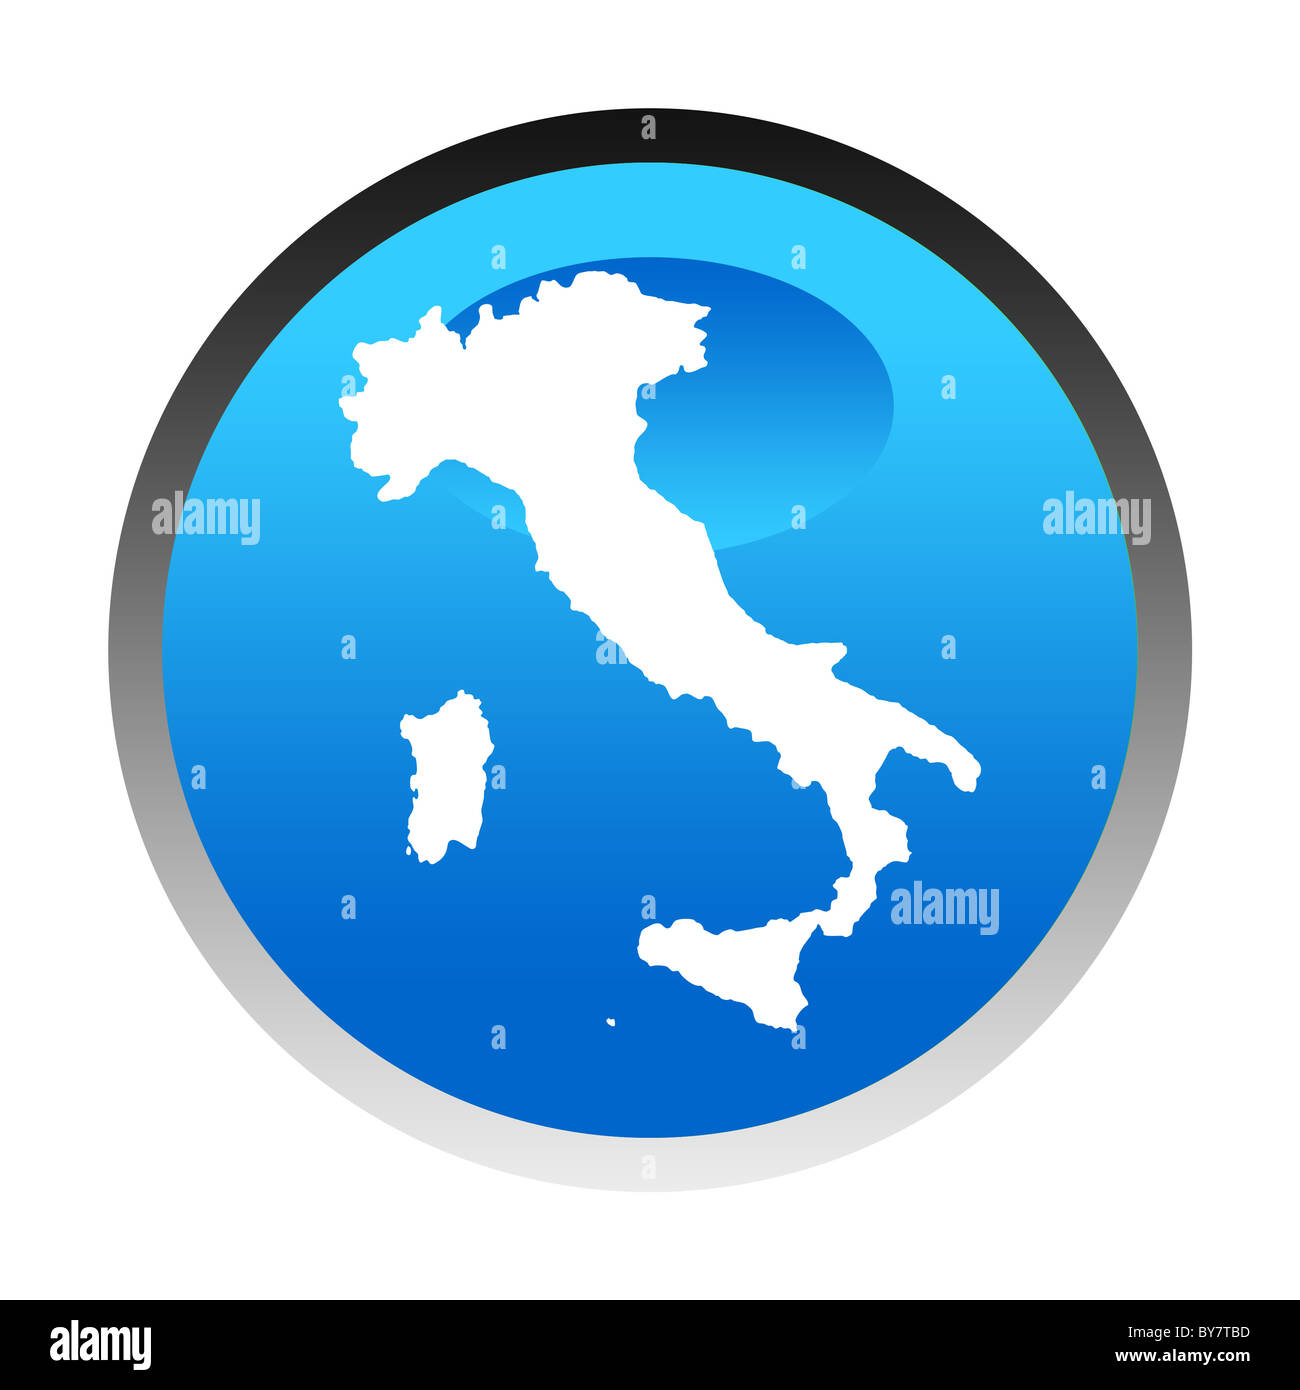 Italy map blue circular button isolated on white background. Stock Photo